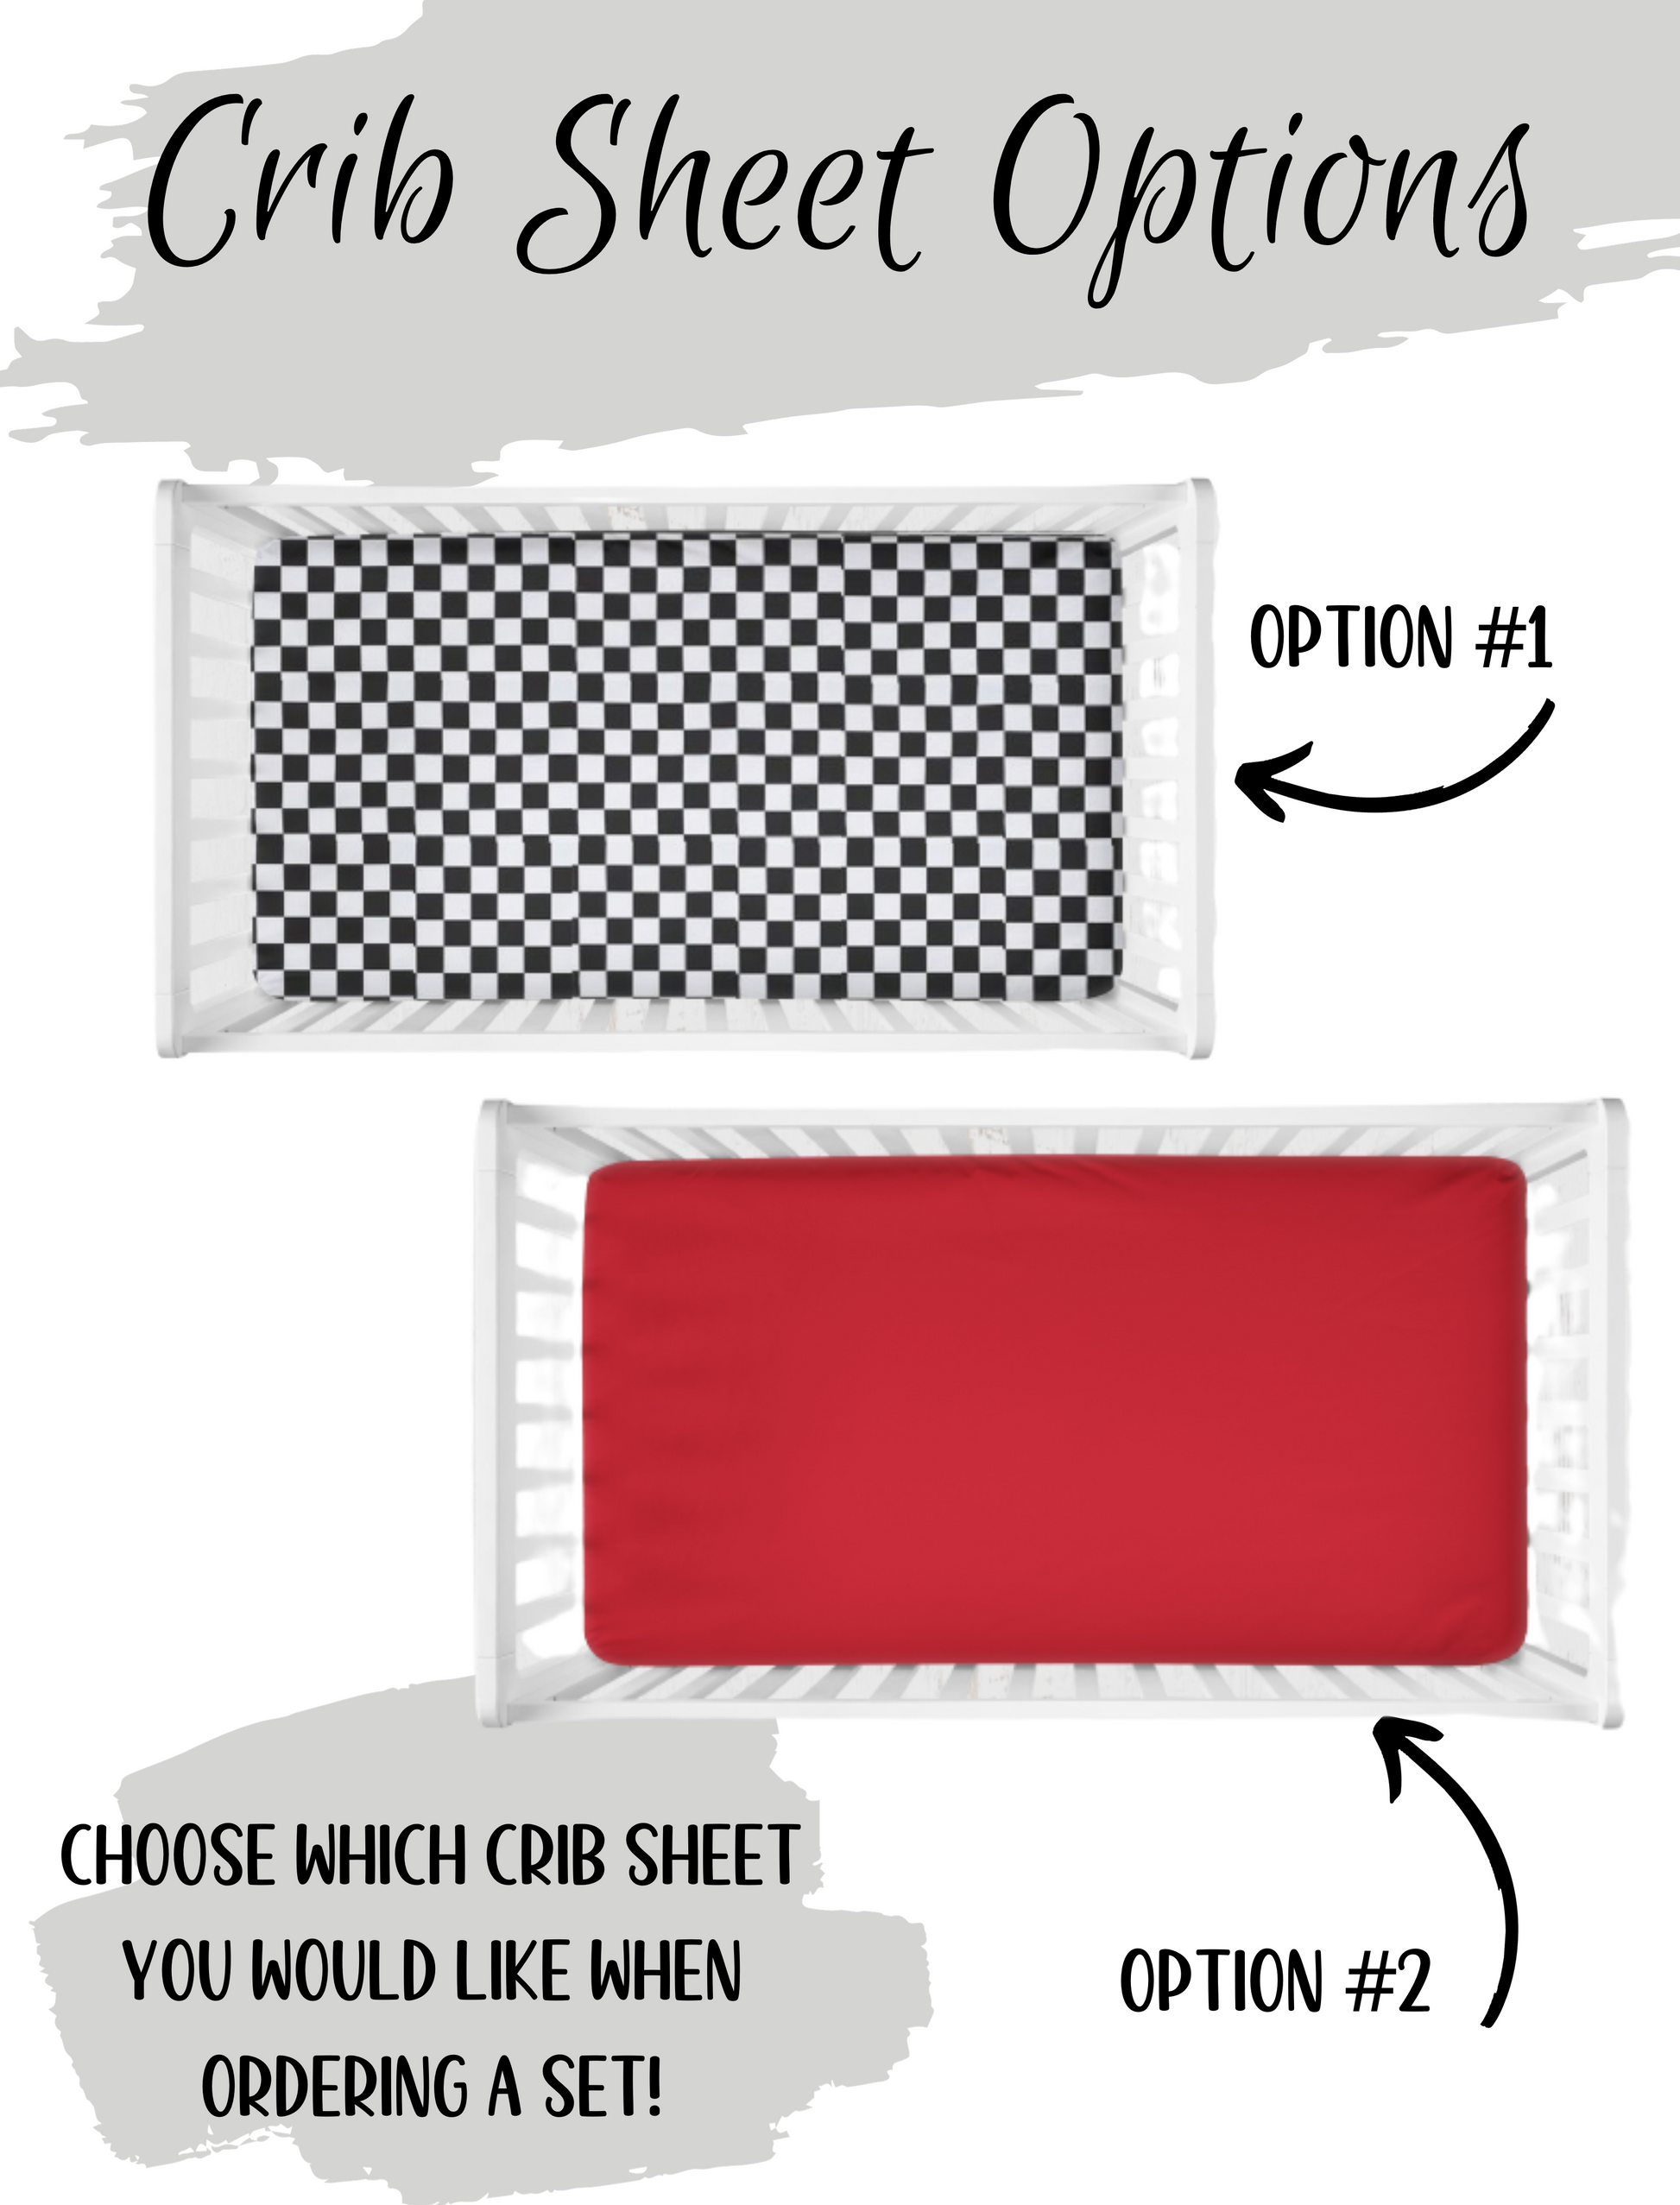 you pick your crib sheet - racing check or red 